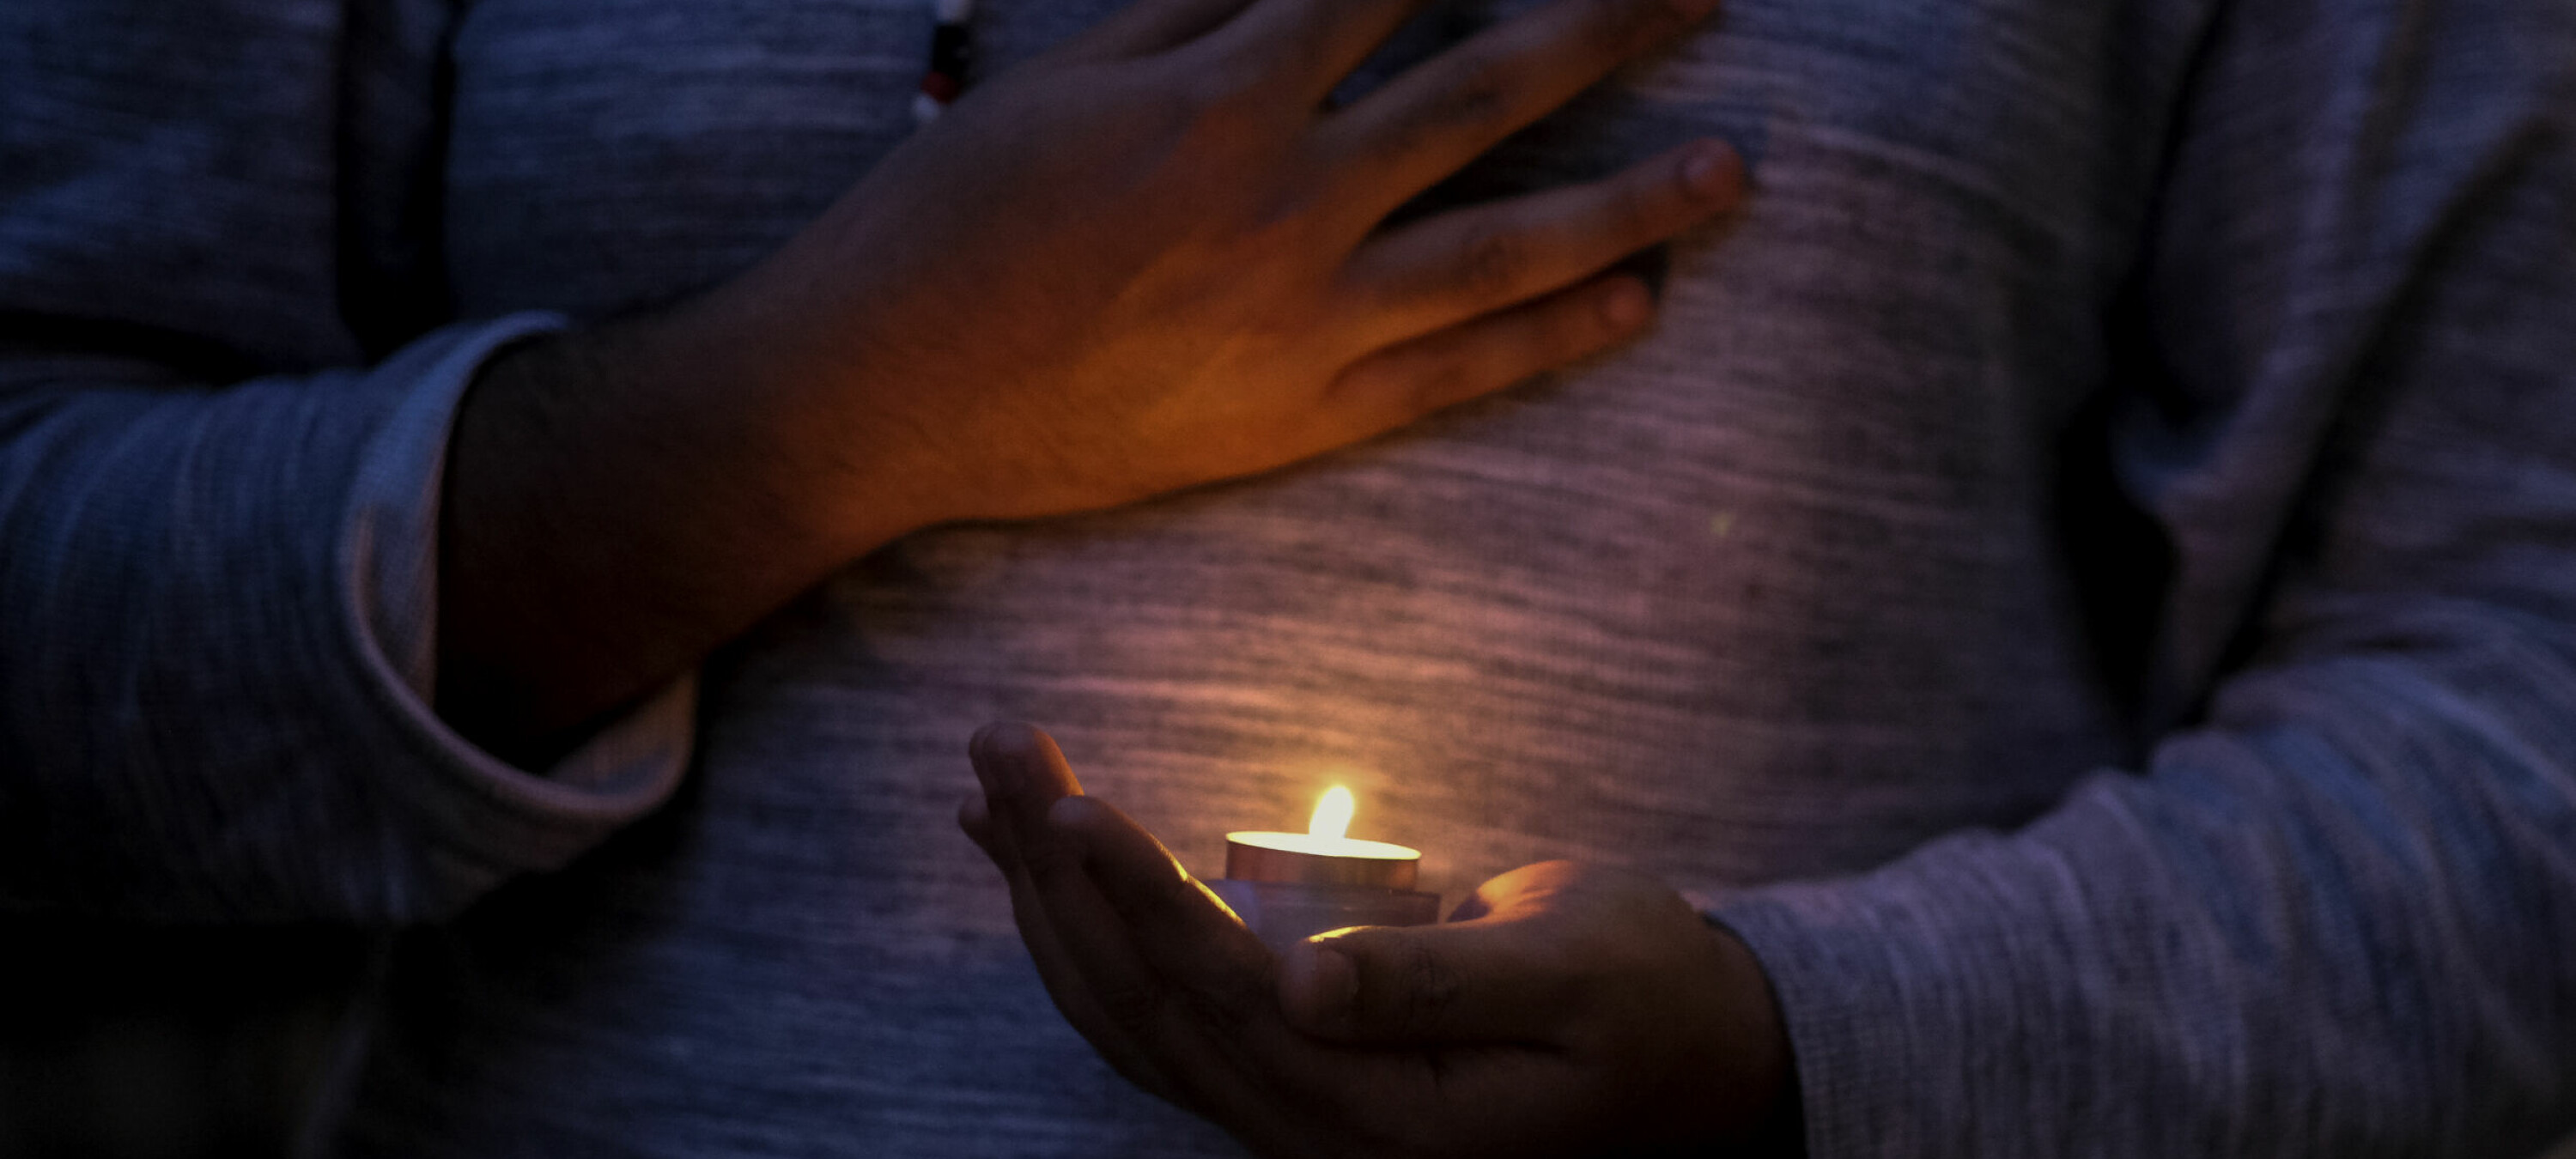 March 1, 2022, Los Angeles, California, USA: A student holds a candlelight during a vigil in support of Ukraine at University of Southern California in Los Angeles on March 1, 2022.